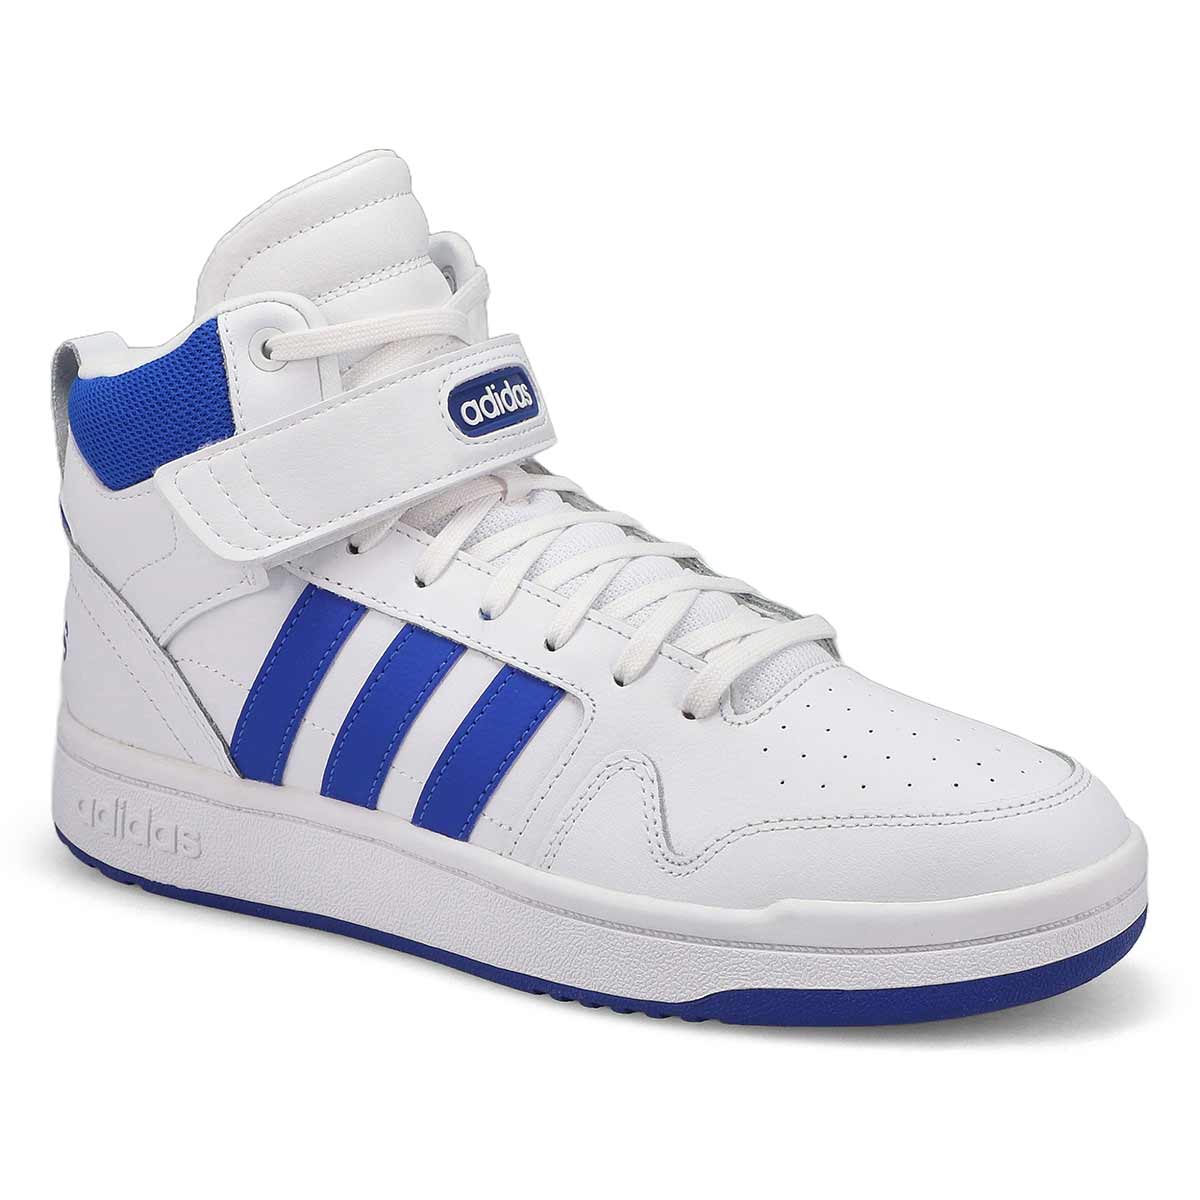 Adidas Shoes, Sneakers, Tennis Shoes & High Tops